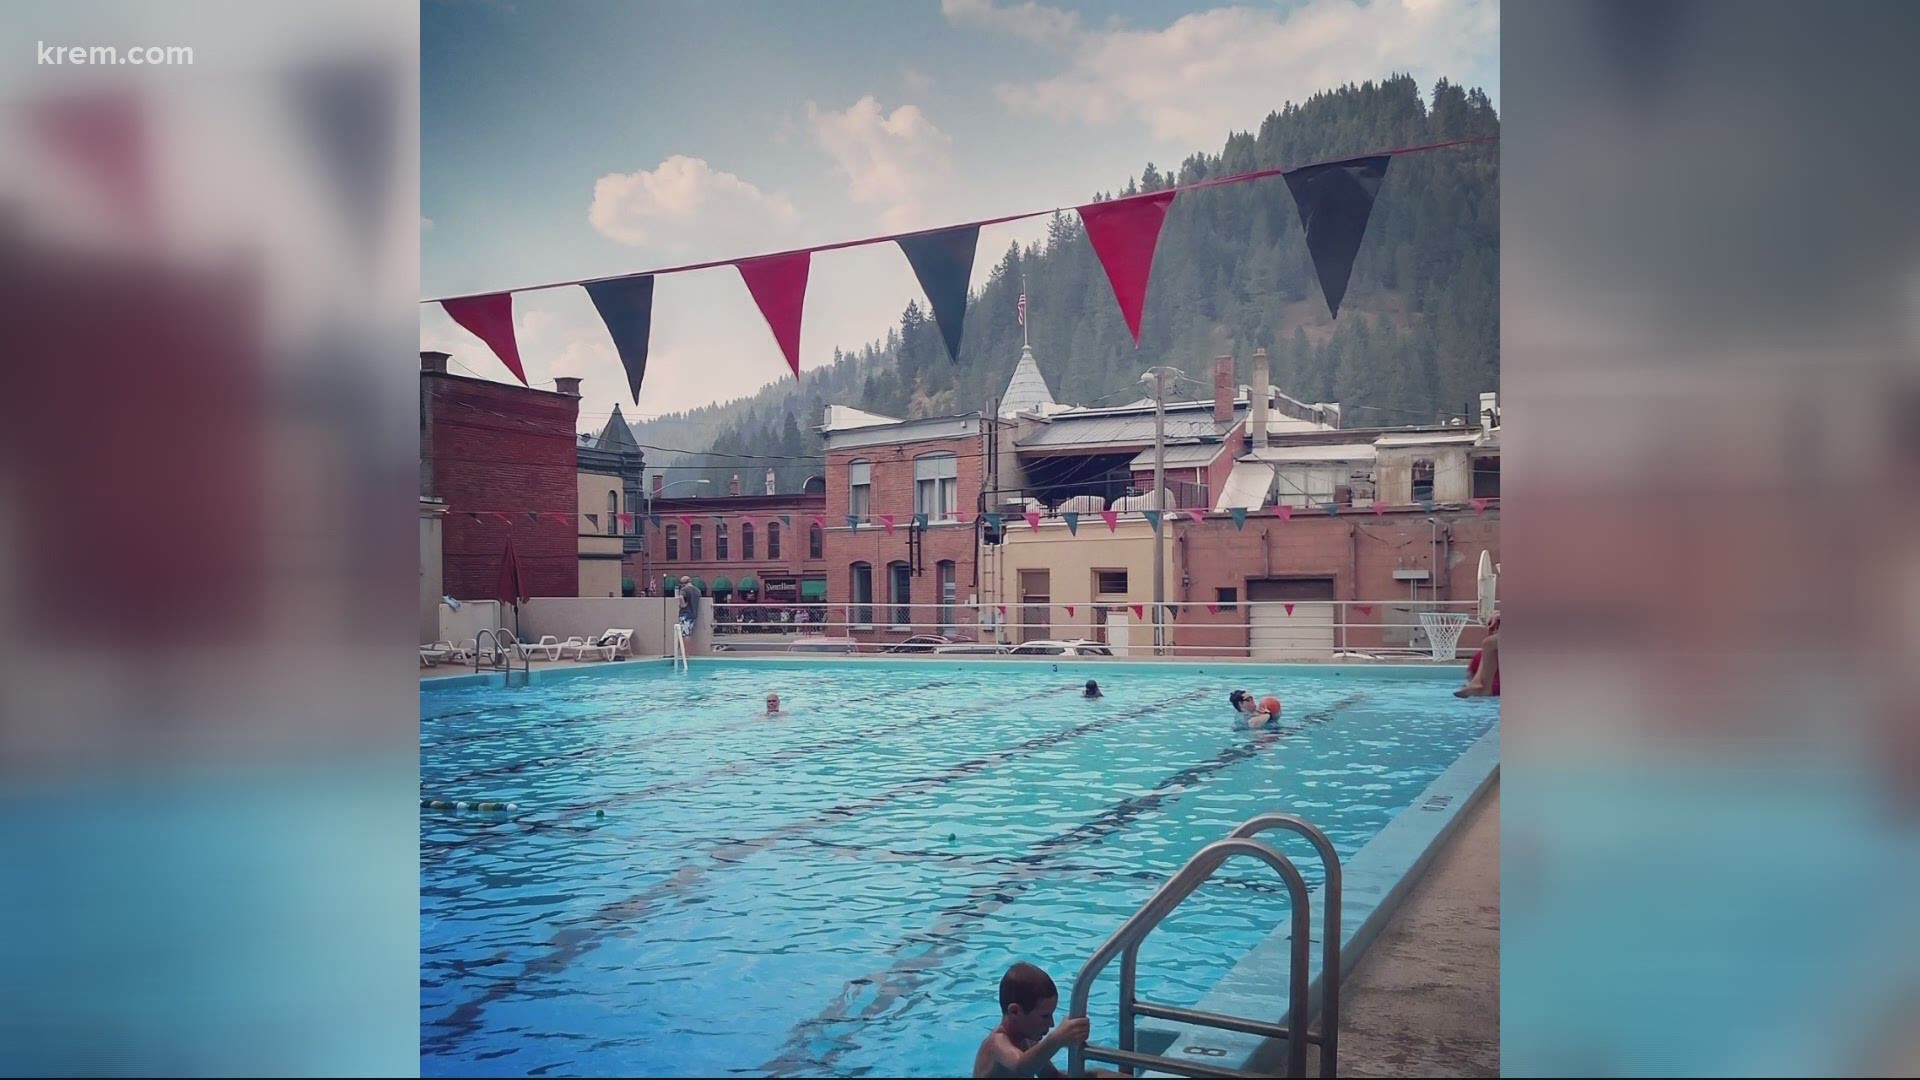 In 2018, the pool had to be shut down for the first time since it was built in 1939.